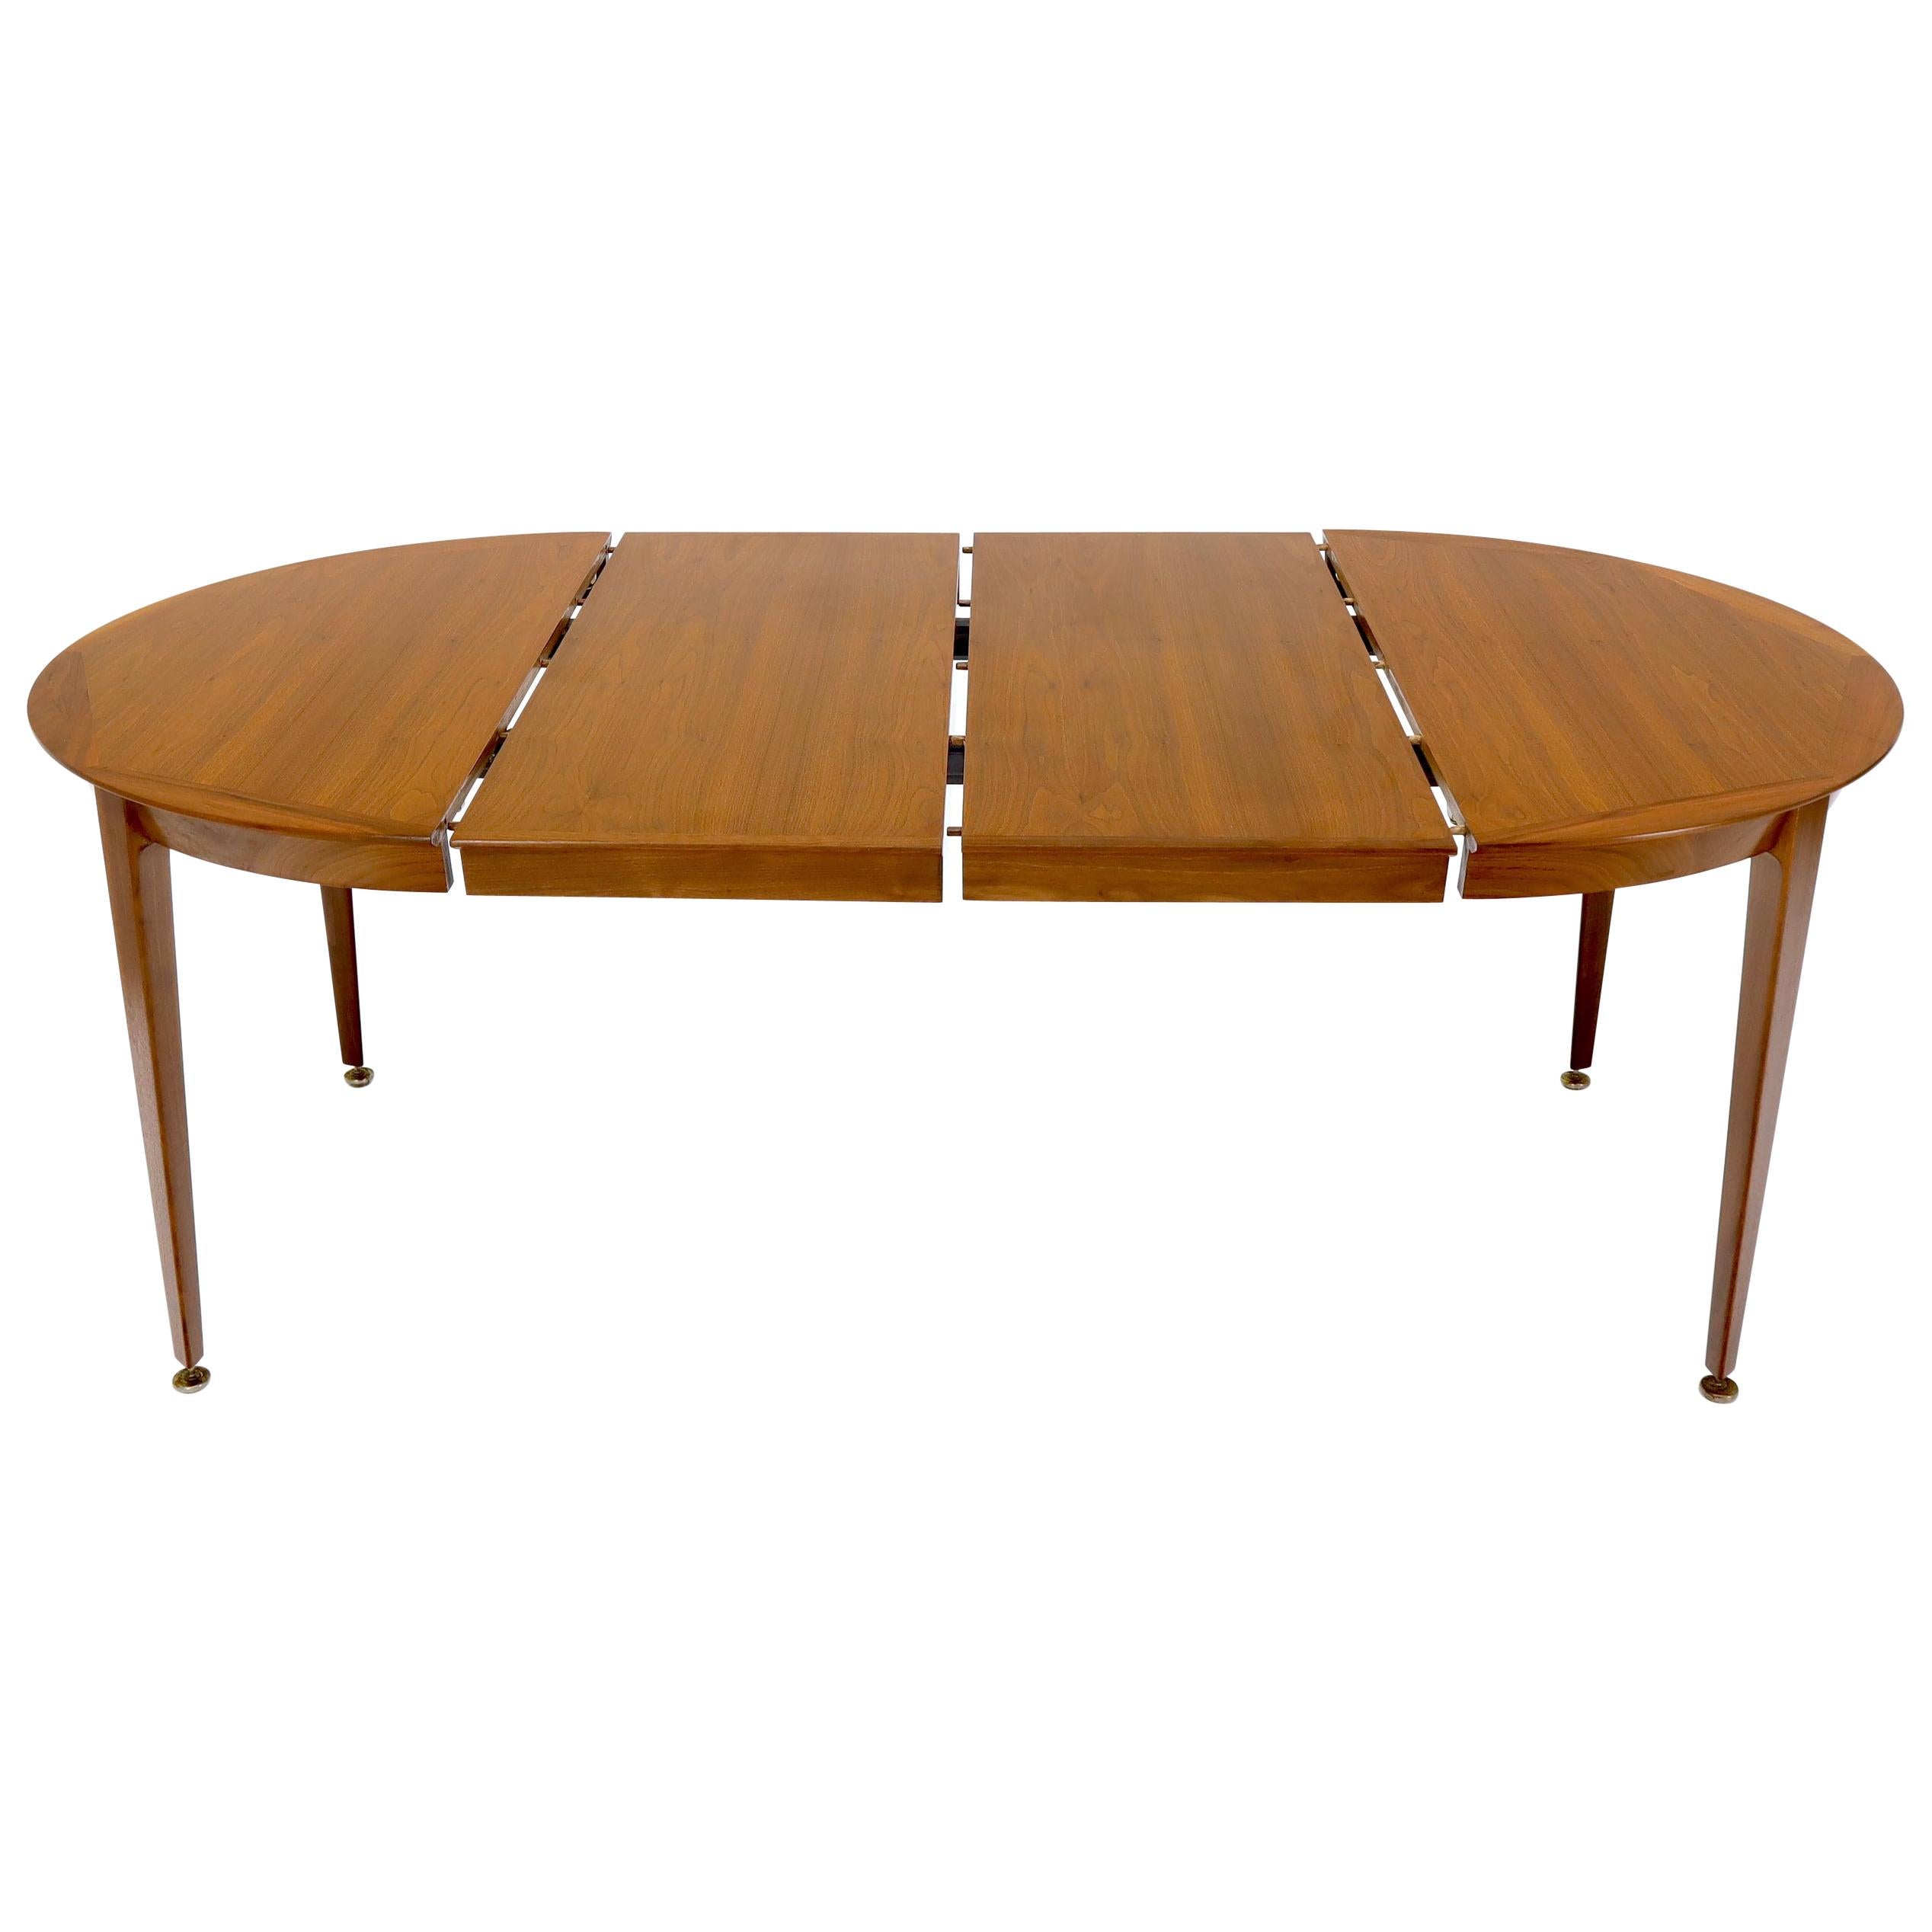 Round Walnut Tapered Legs Dining Room Table with Two Extensions Boards